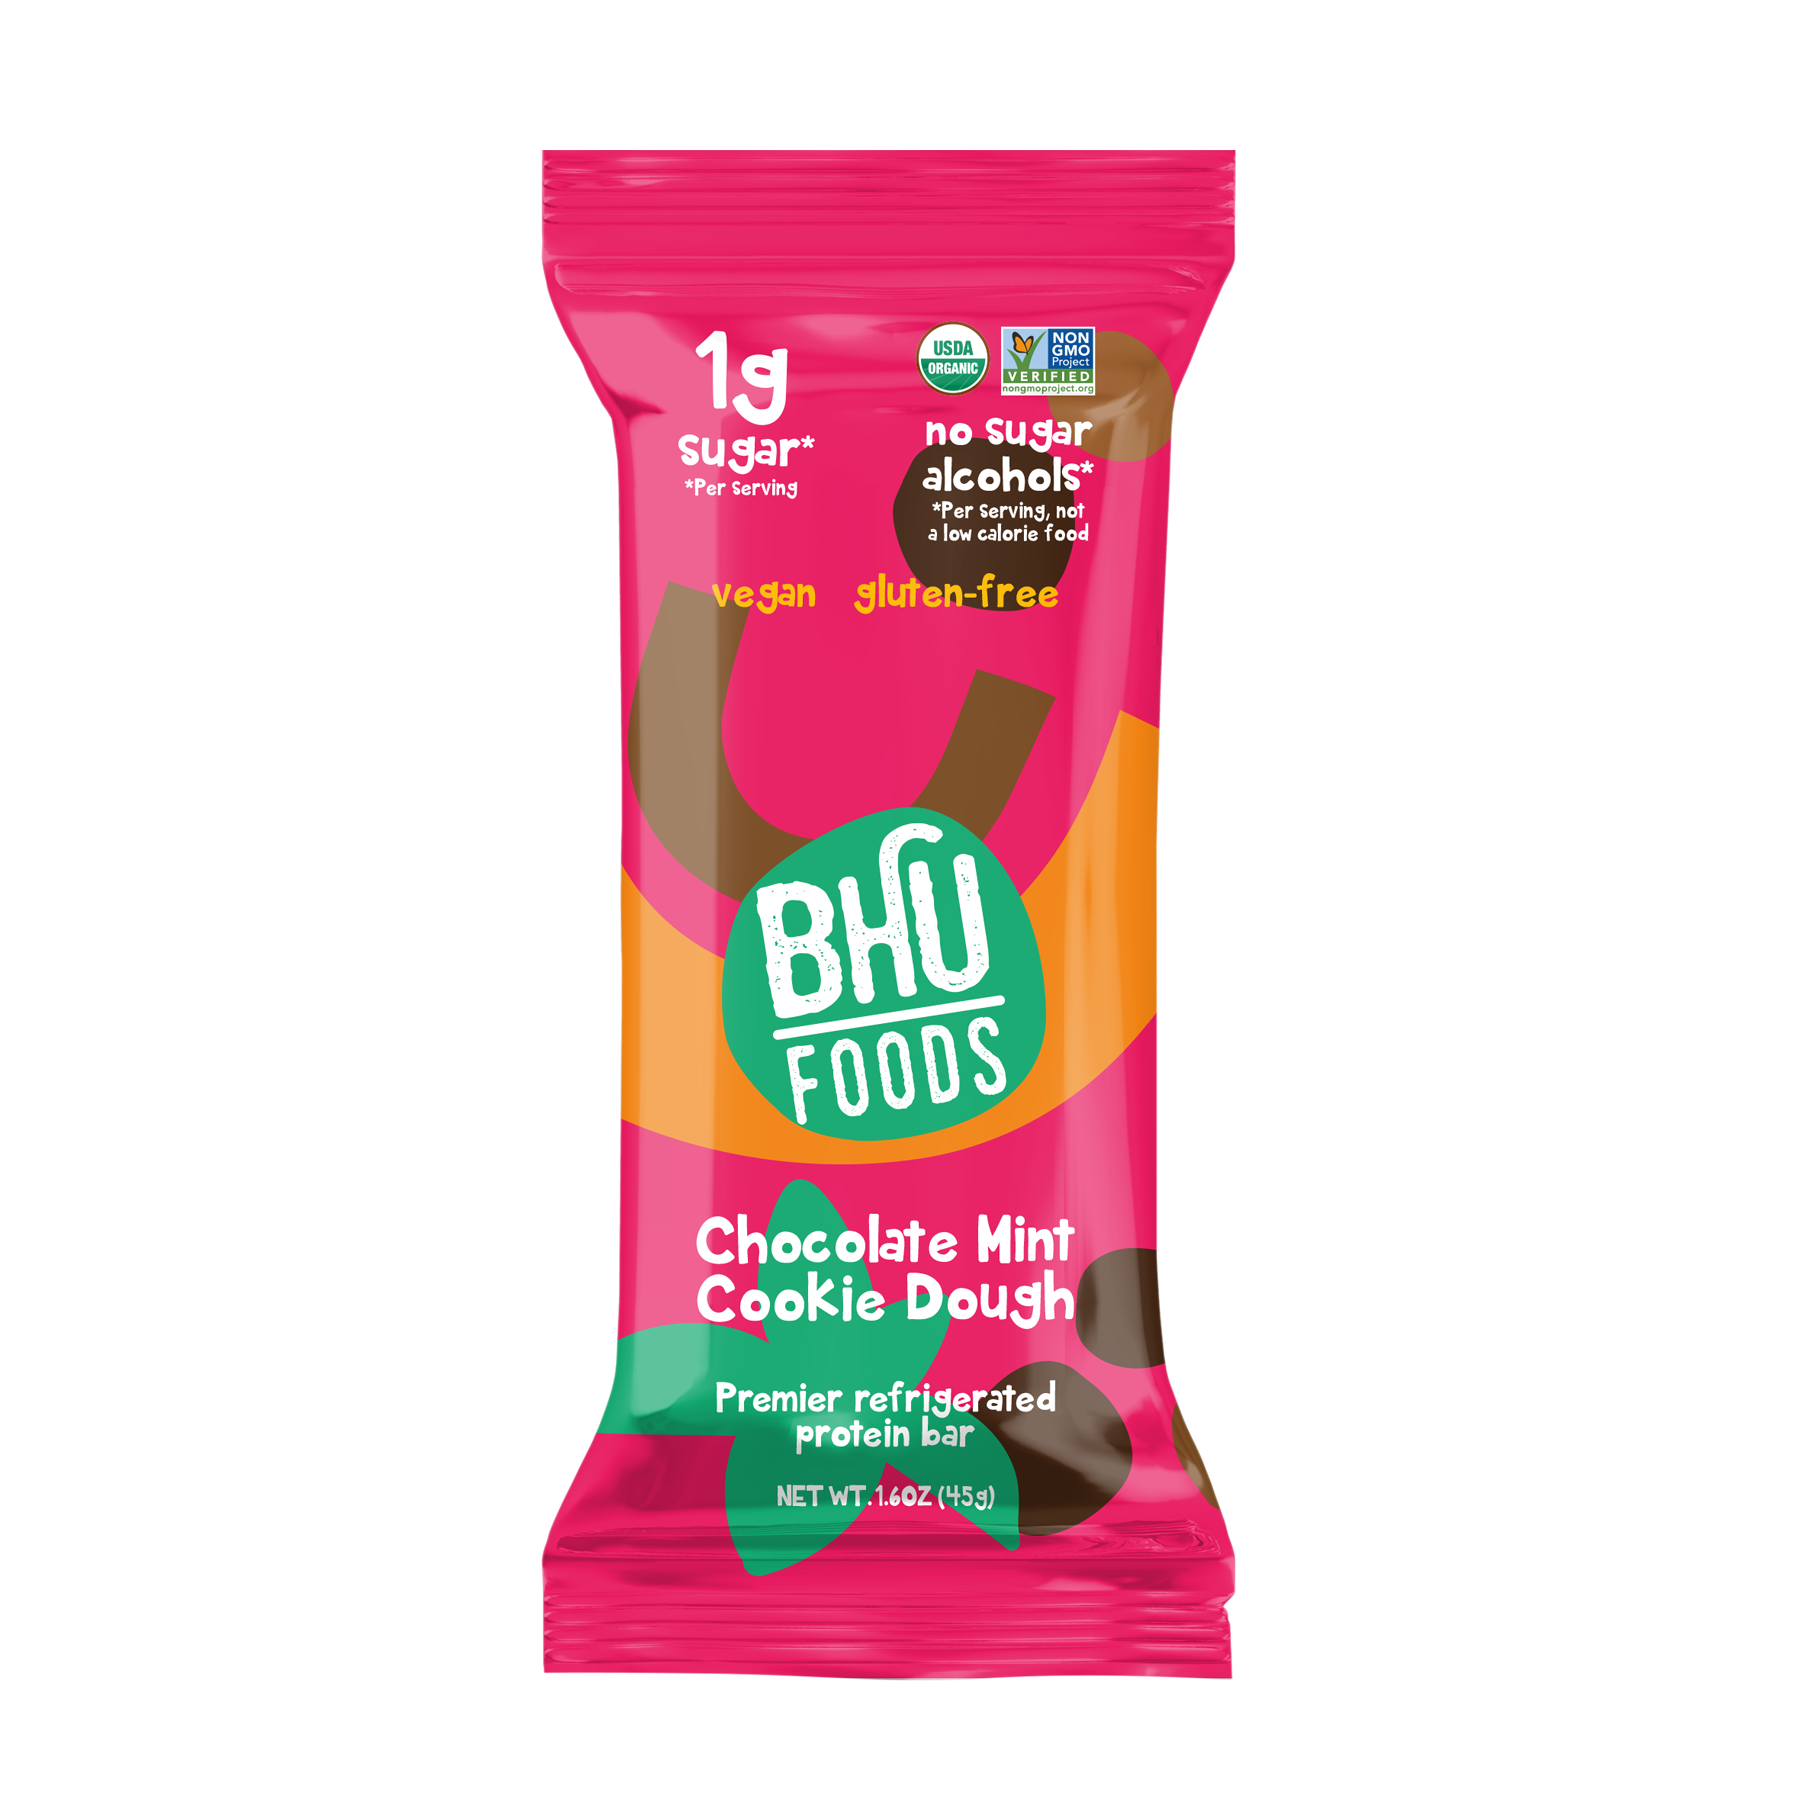 BHU Foods Premier Refrigerated Protein Bar - Chocolate Mint Cookie Dough 12 innerpacks per case 12.8 oz